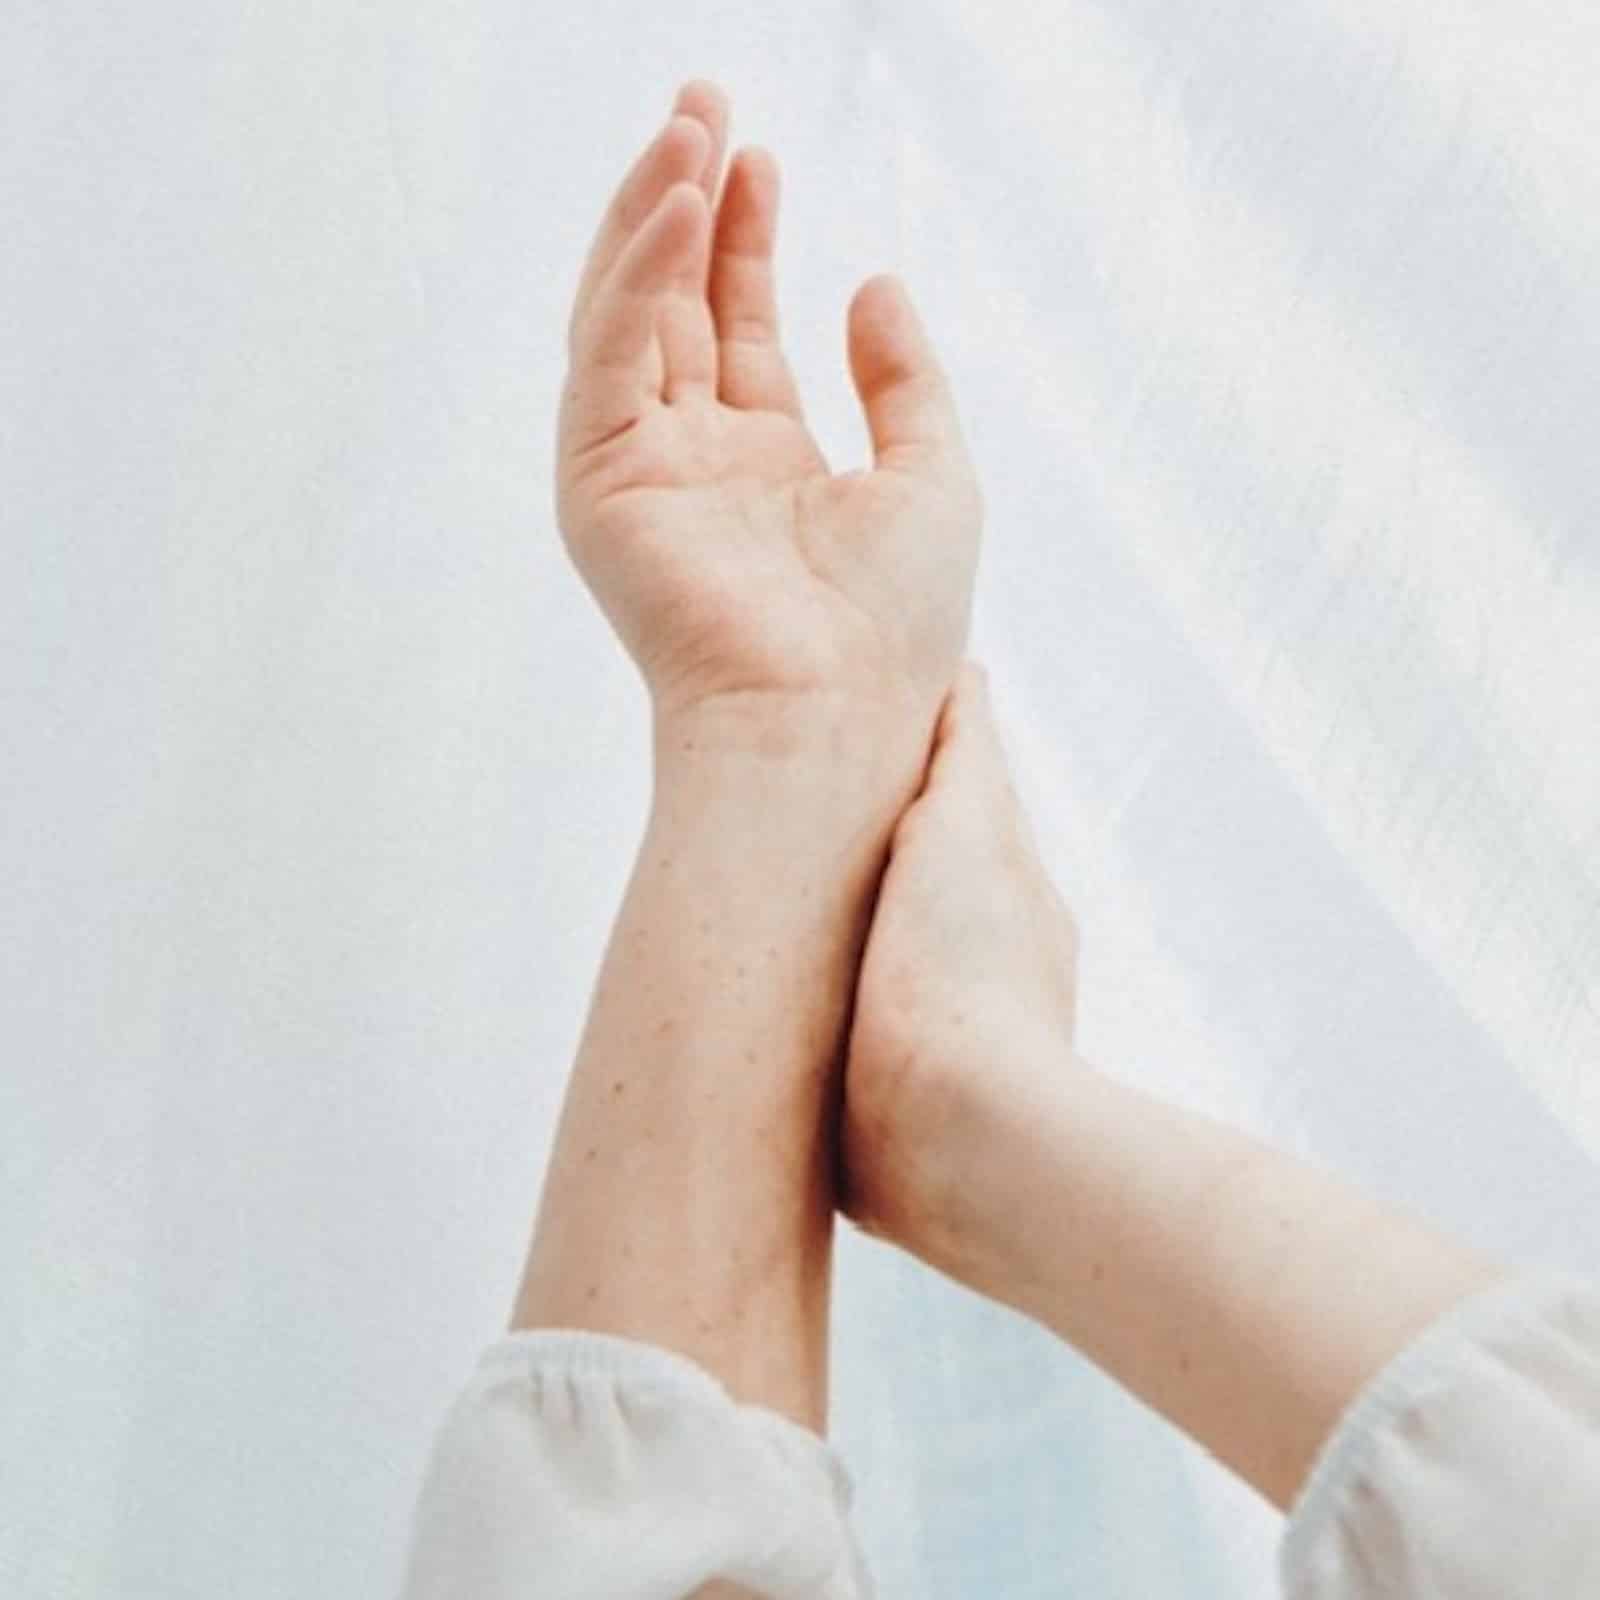 An image of a person's hands intertwined in front of a white backdrop. Muscle testing is also known as applied kinesiology.